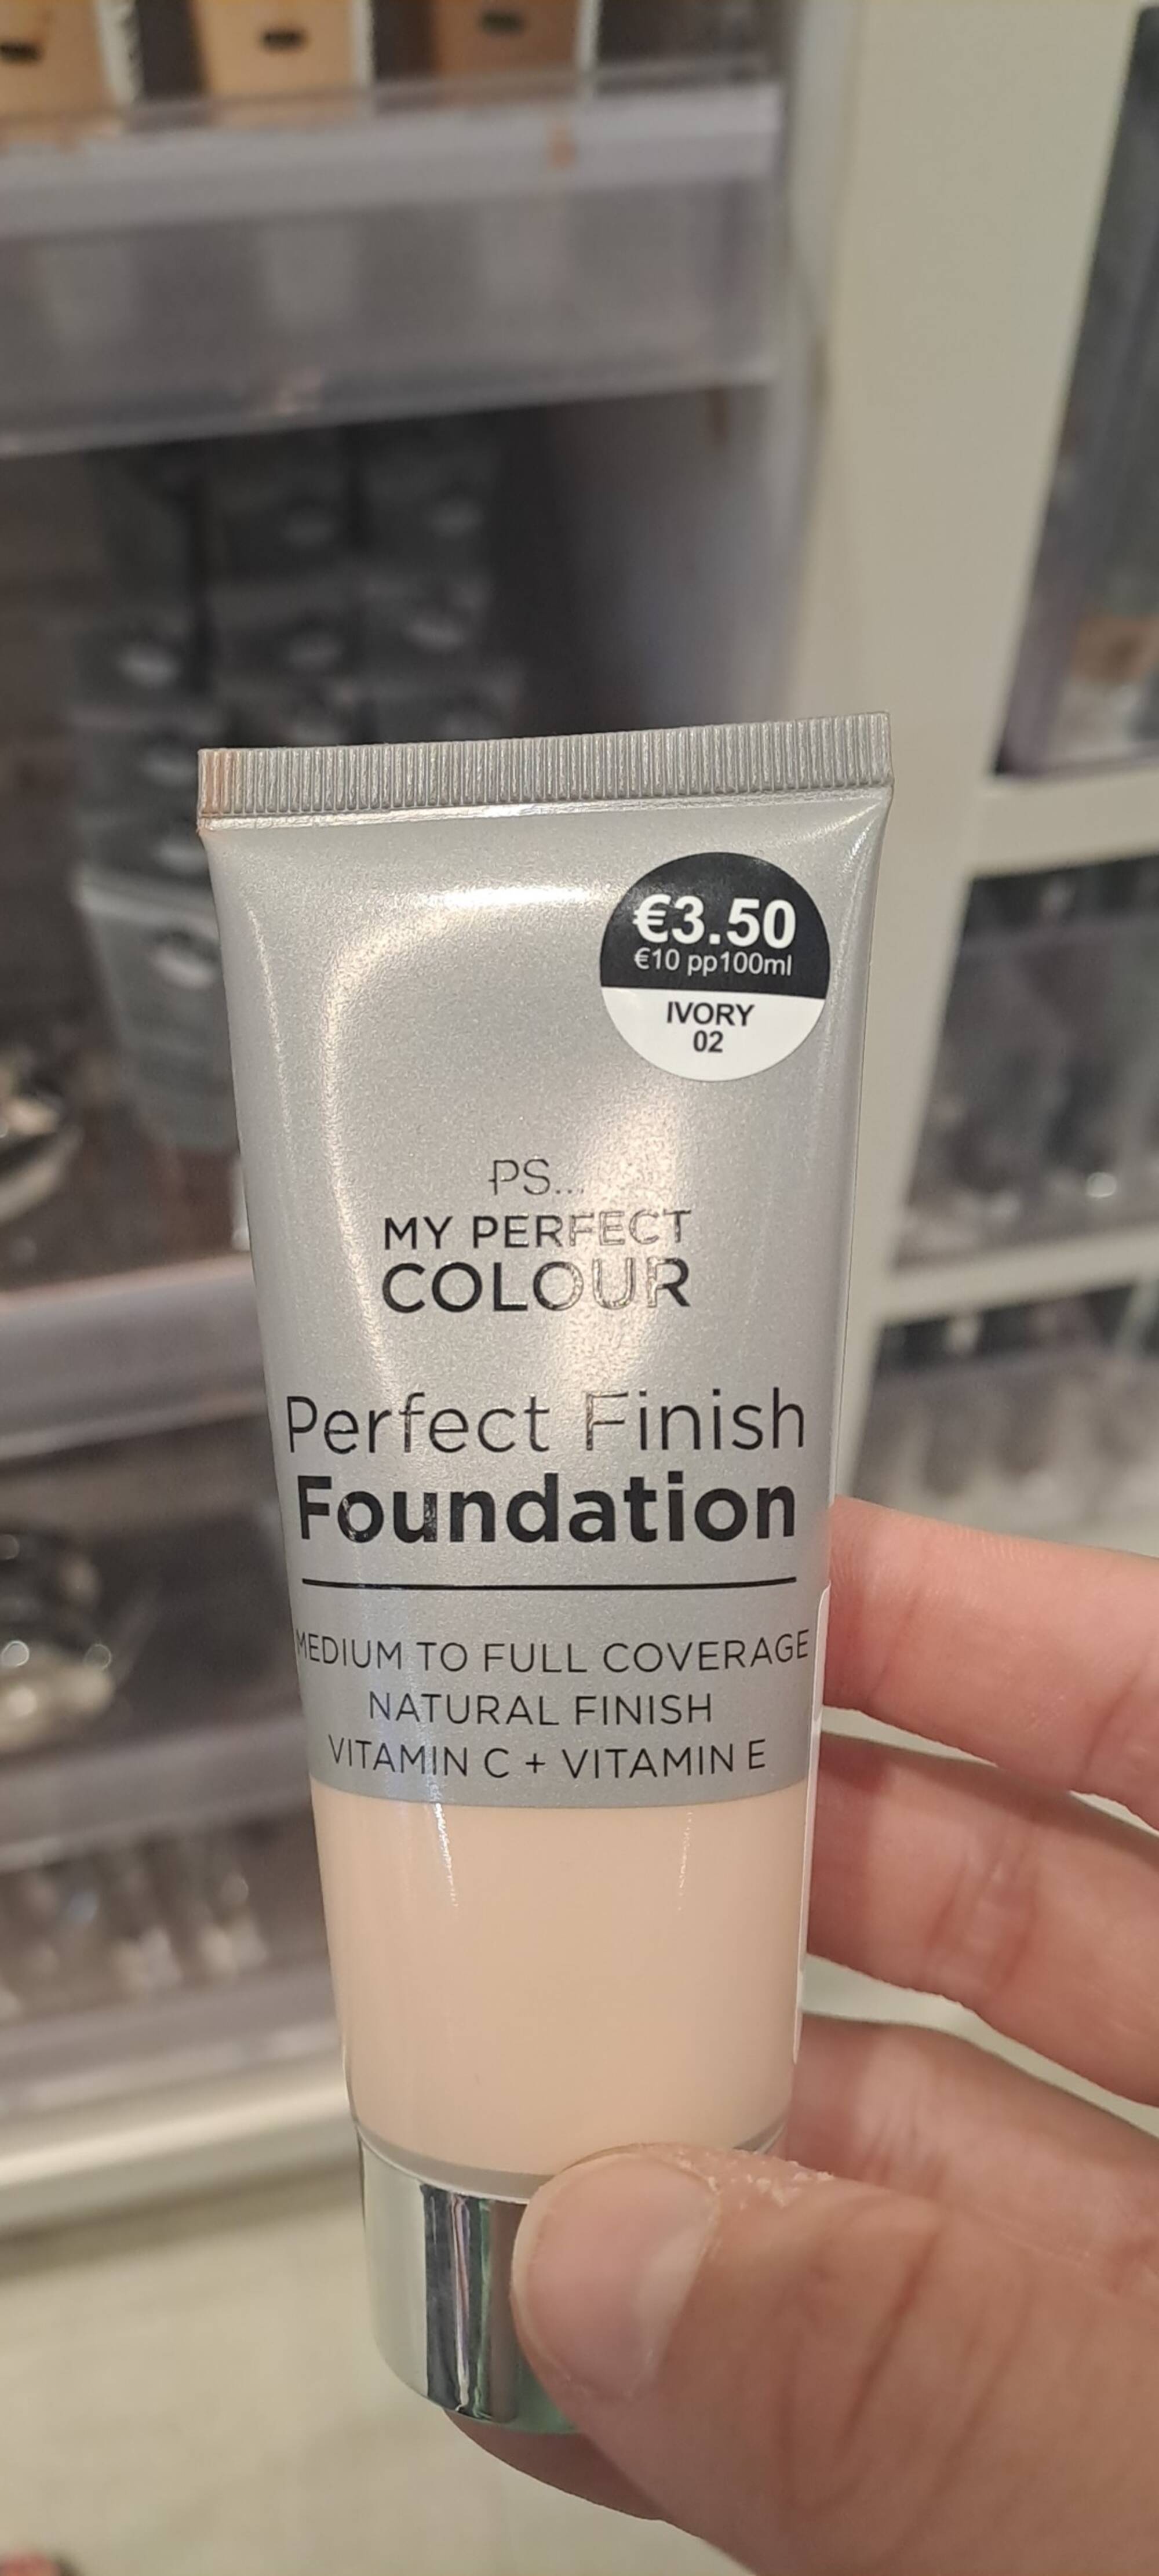 PRIMARK - PS...My perfect colour - Perfect finish foundation ivory 02